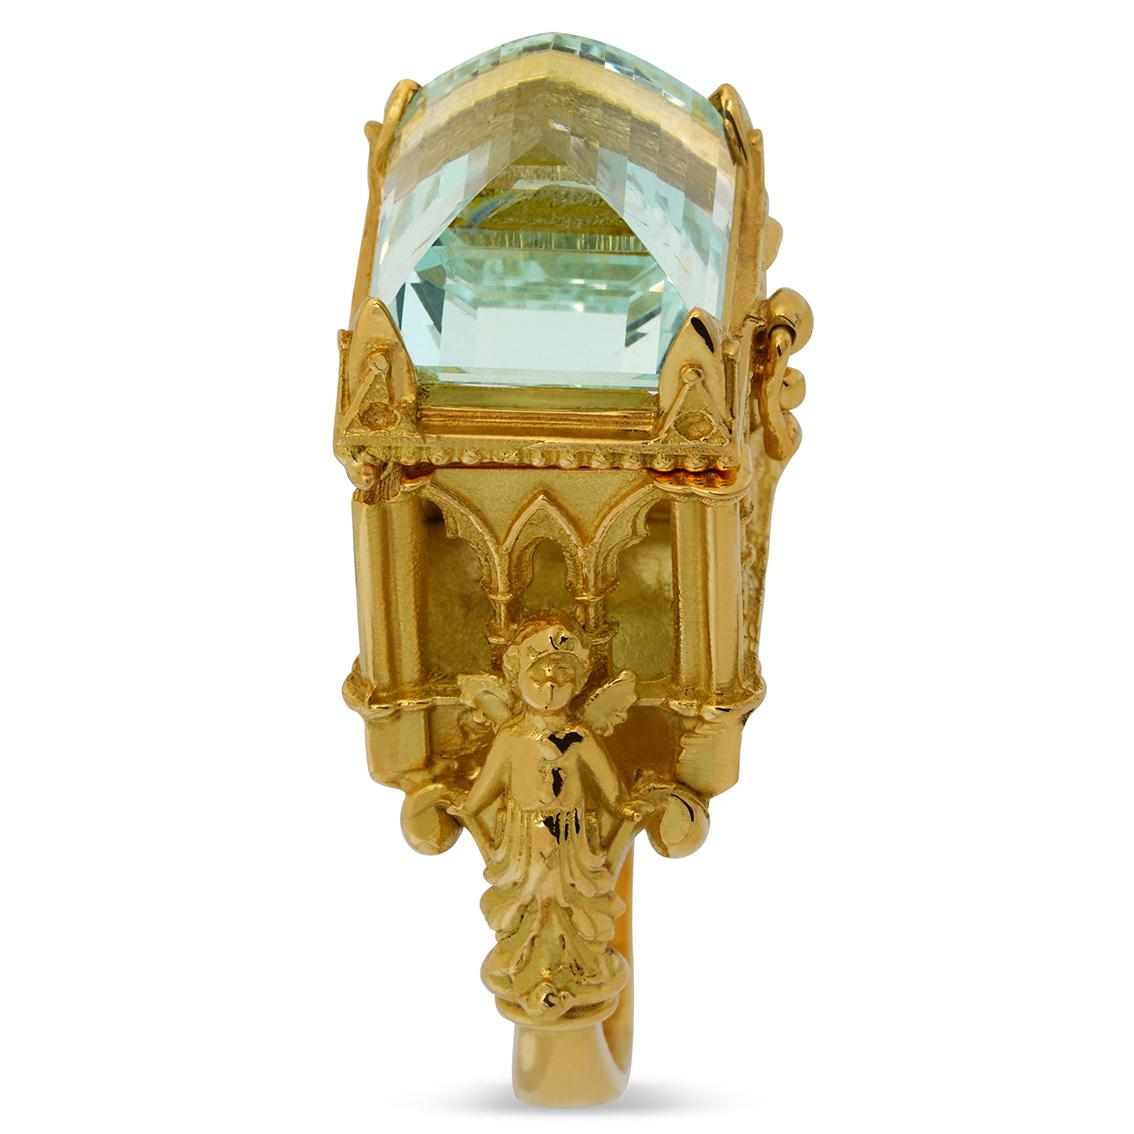 Flanked by two guardian angels and sitting aloft a gorgeous soft rounded split shank, this stunning gothic cathedral ring exquisitely handcrafted in 18kt yellow gold features a latched chamber topped with a divine 8.66 carat powder blue 12.45mm (L)